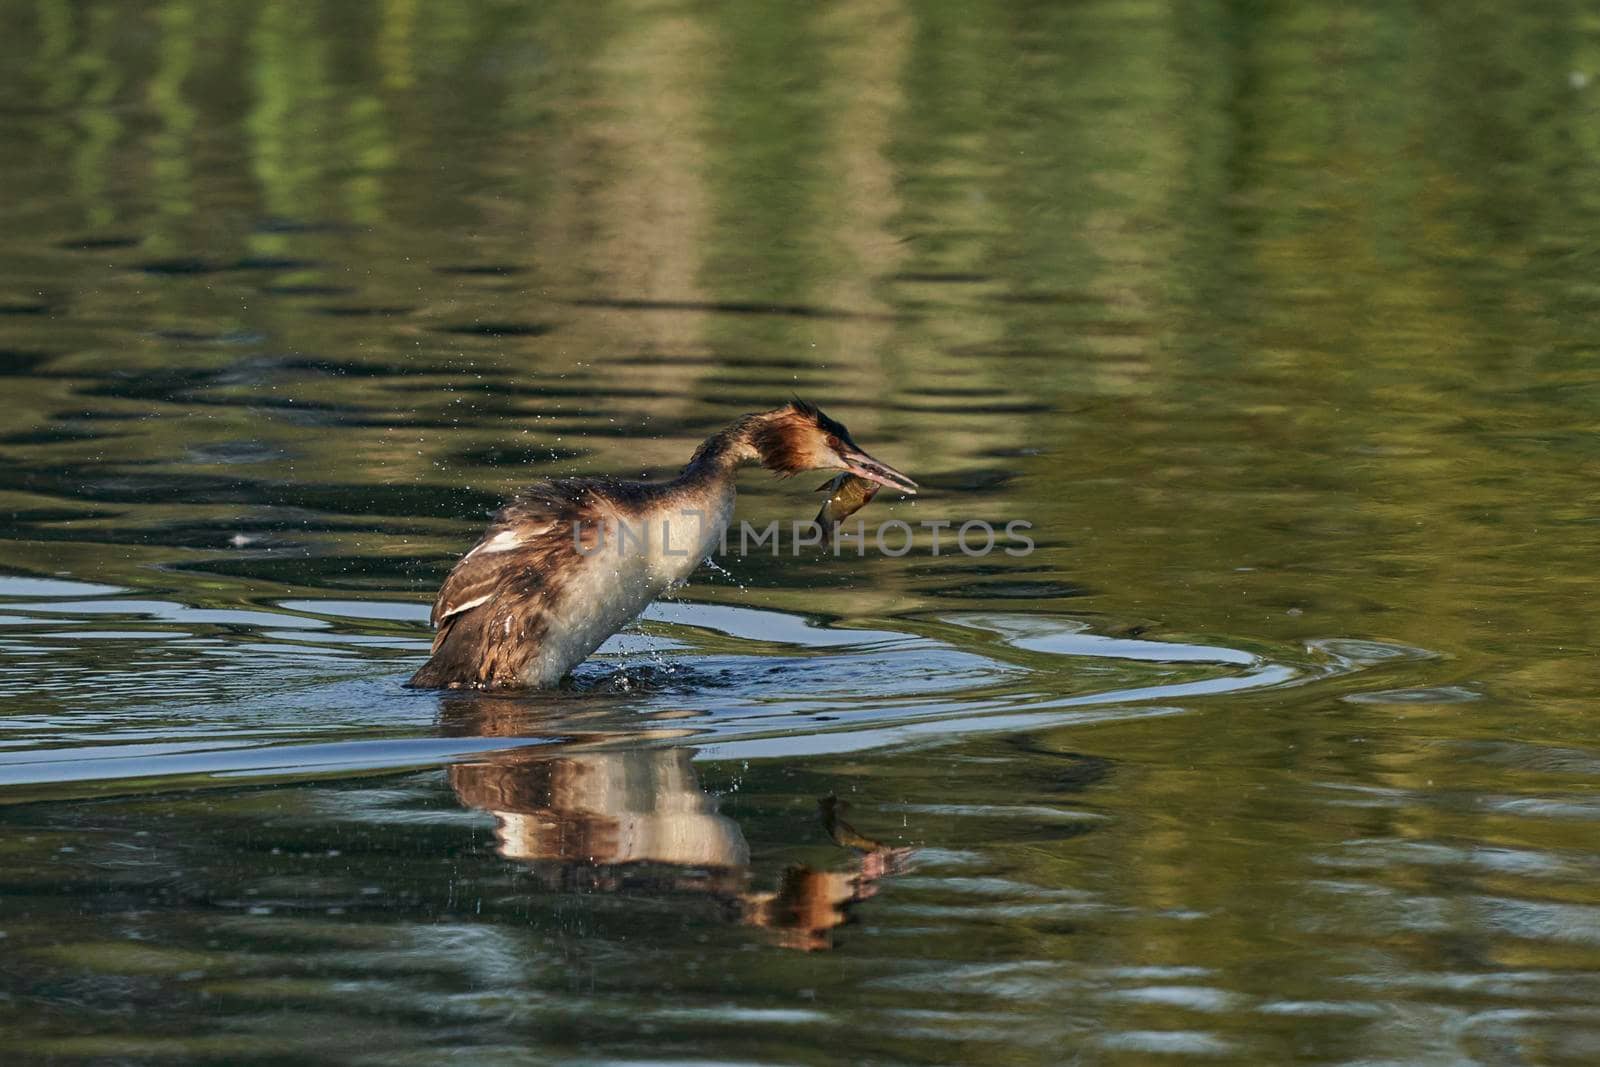 Great Crested Grebe grappling with a fish by JeremyRichards